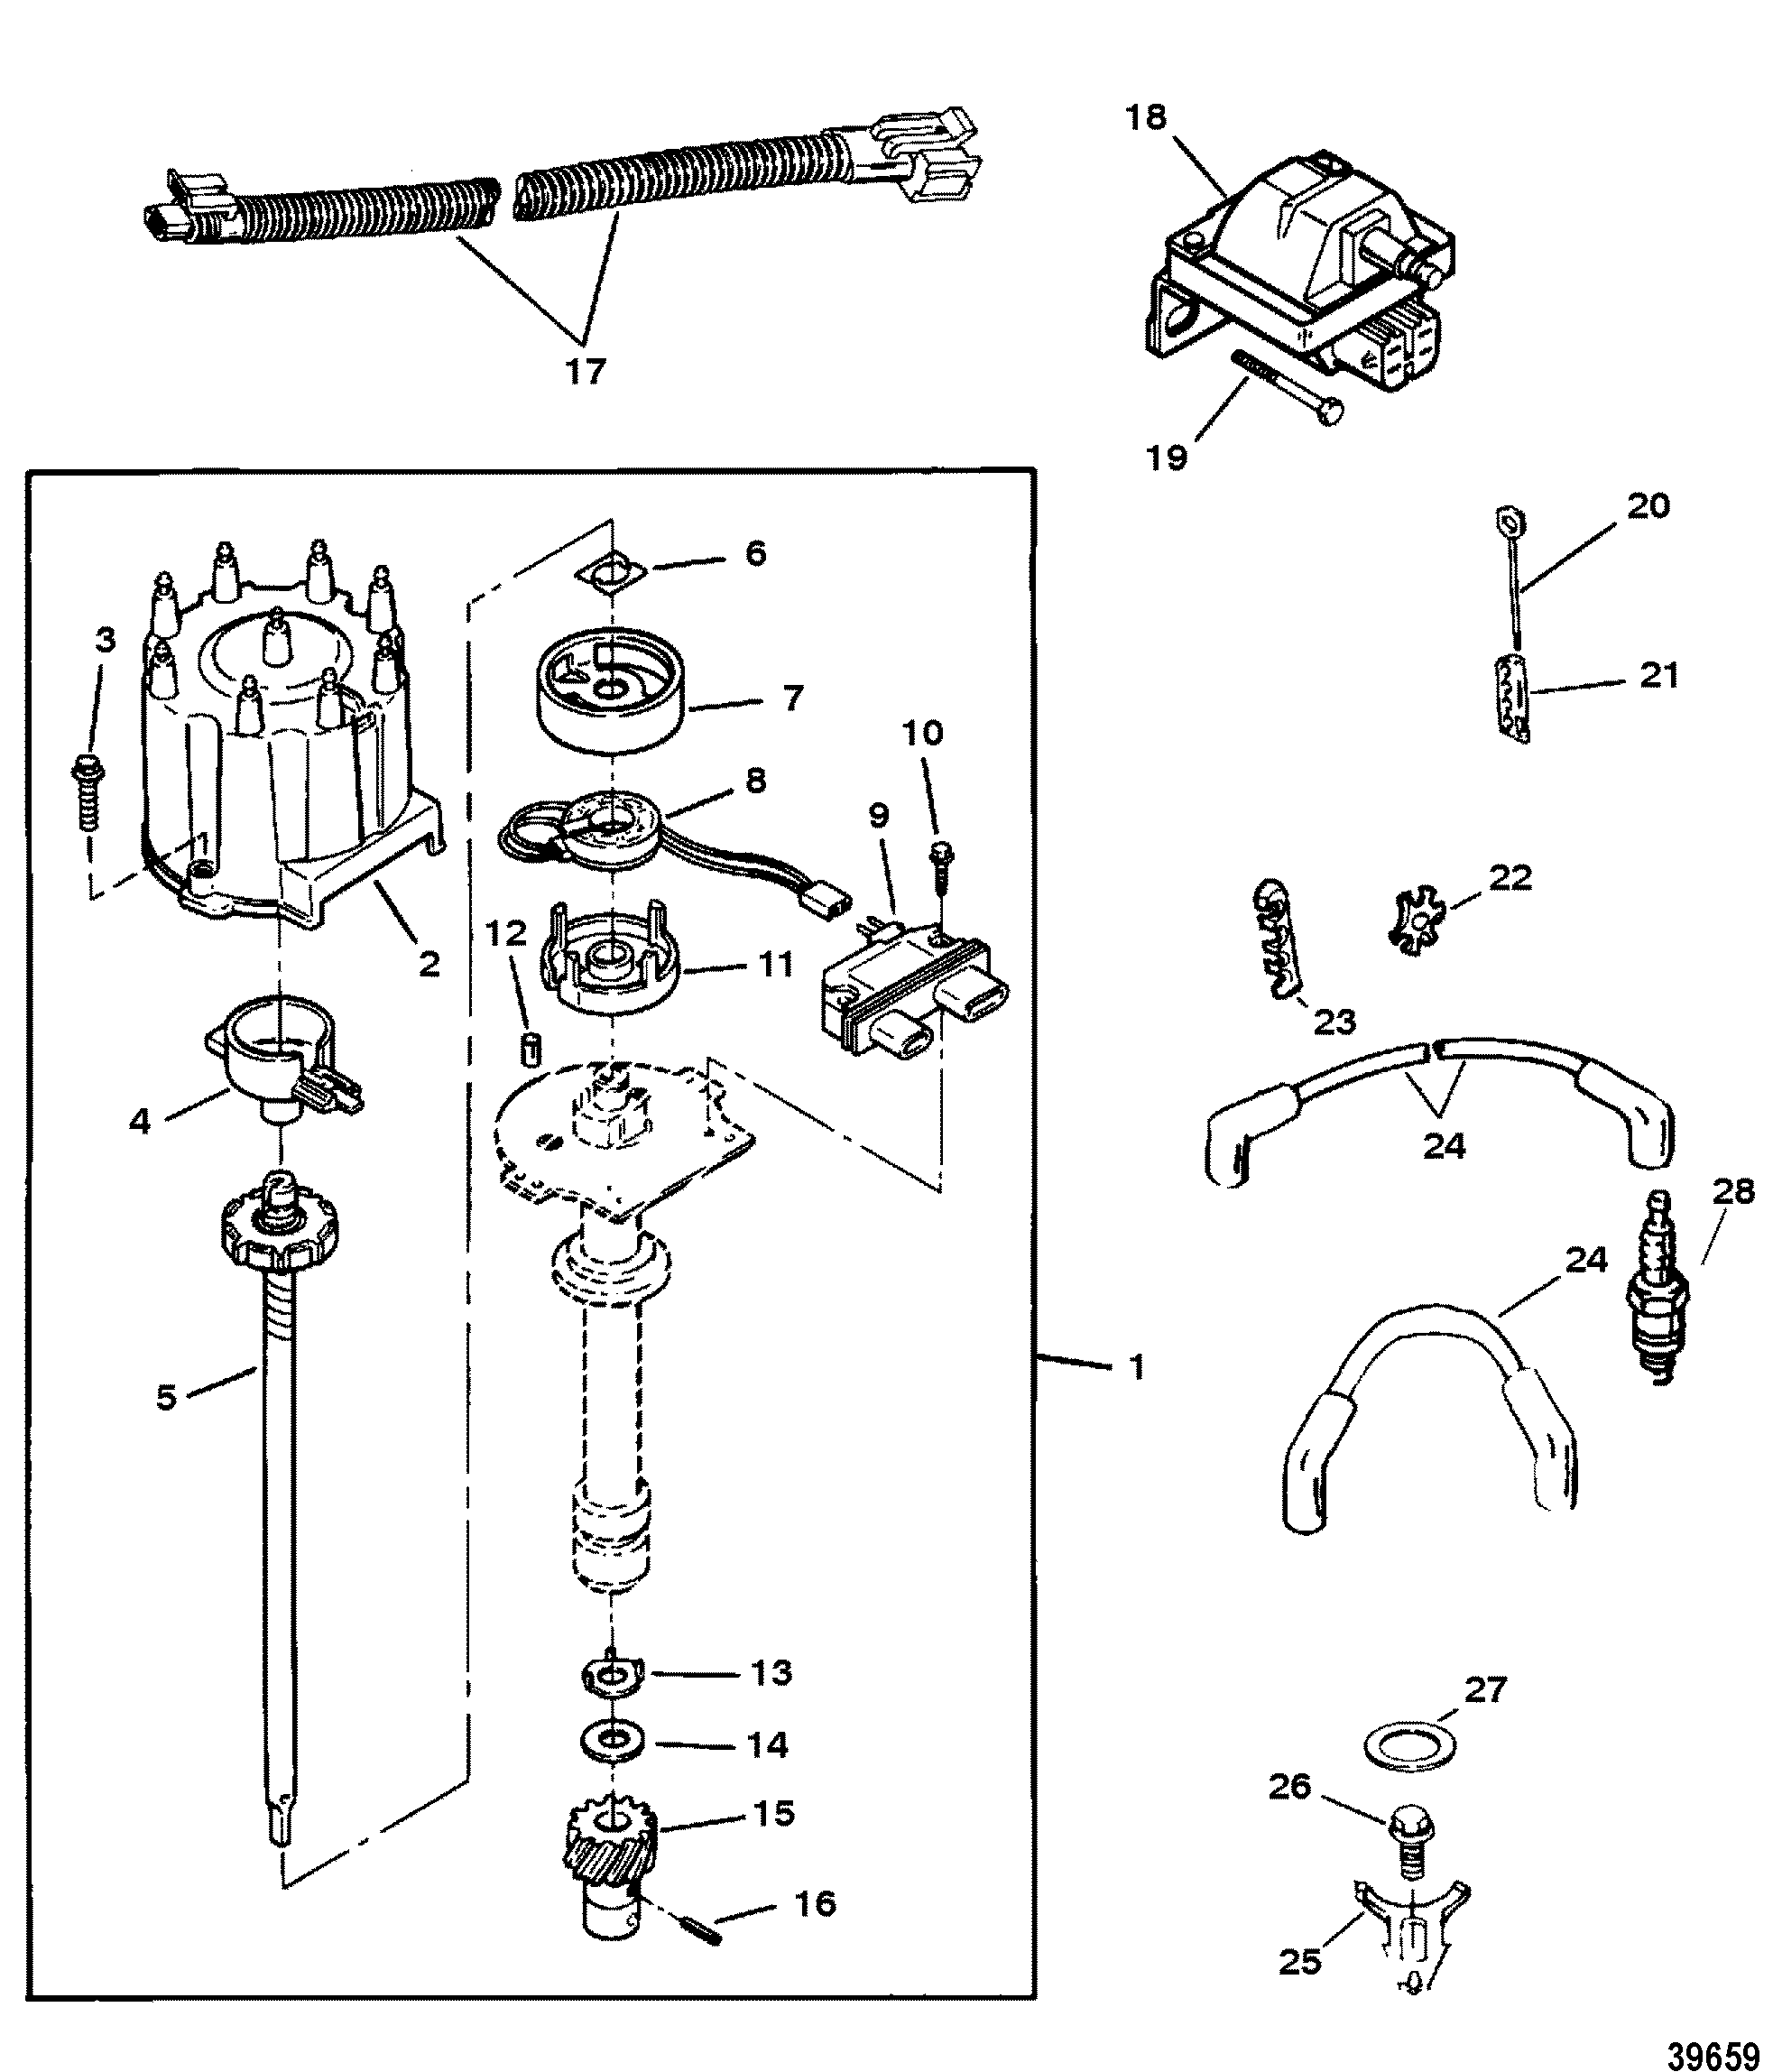 DISTRIBUTOR AND IGNITION COMPONENTS